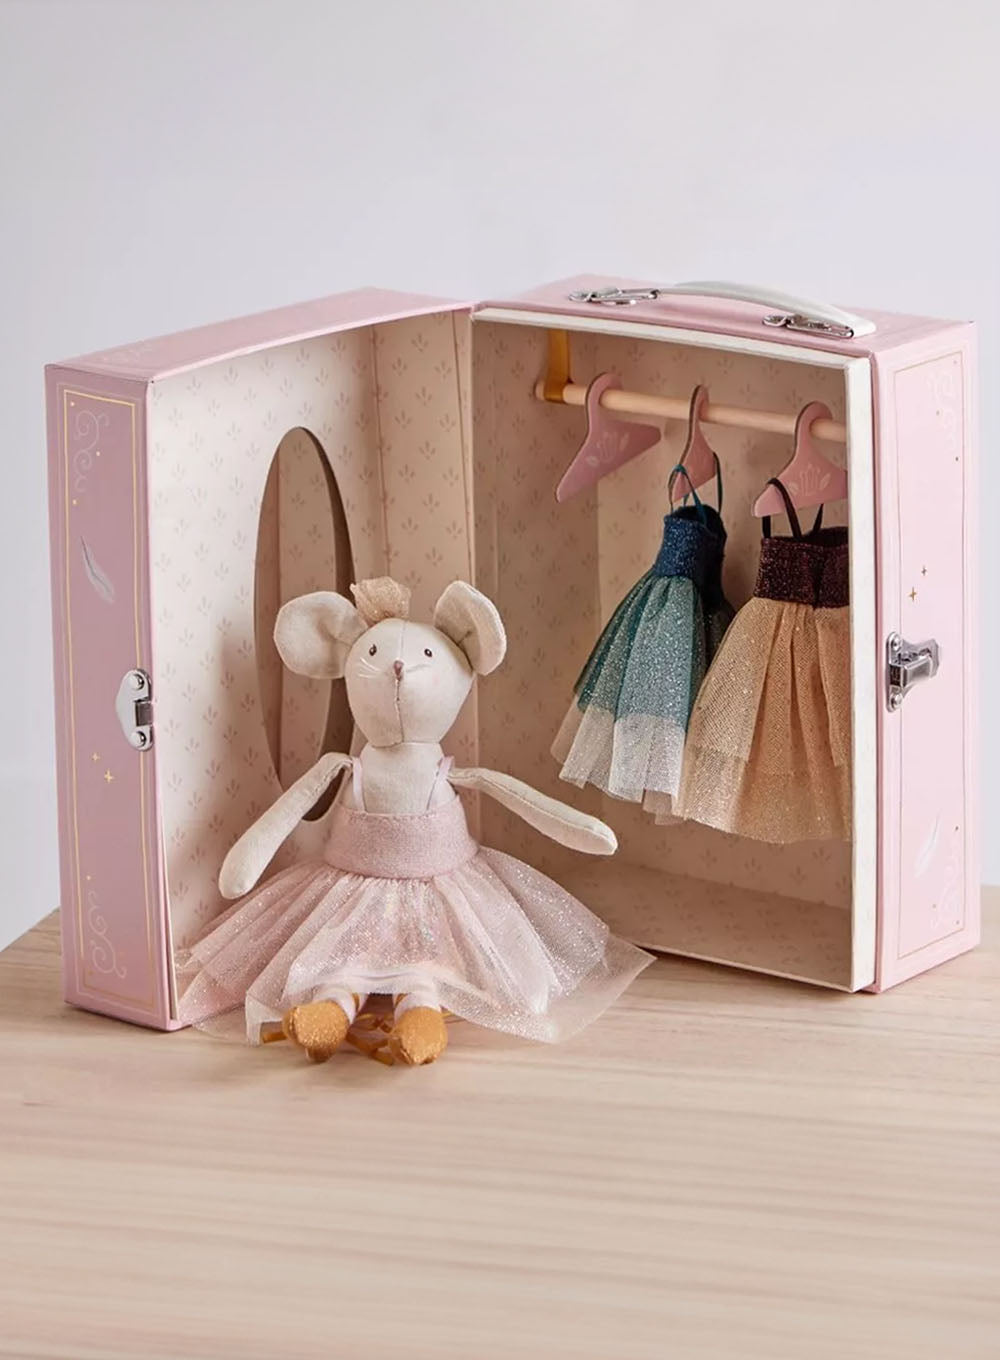 Children Moulin Roty Le Danse Ballerina Mouse with A Suitcase Toy